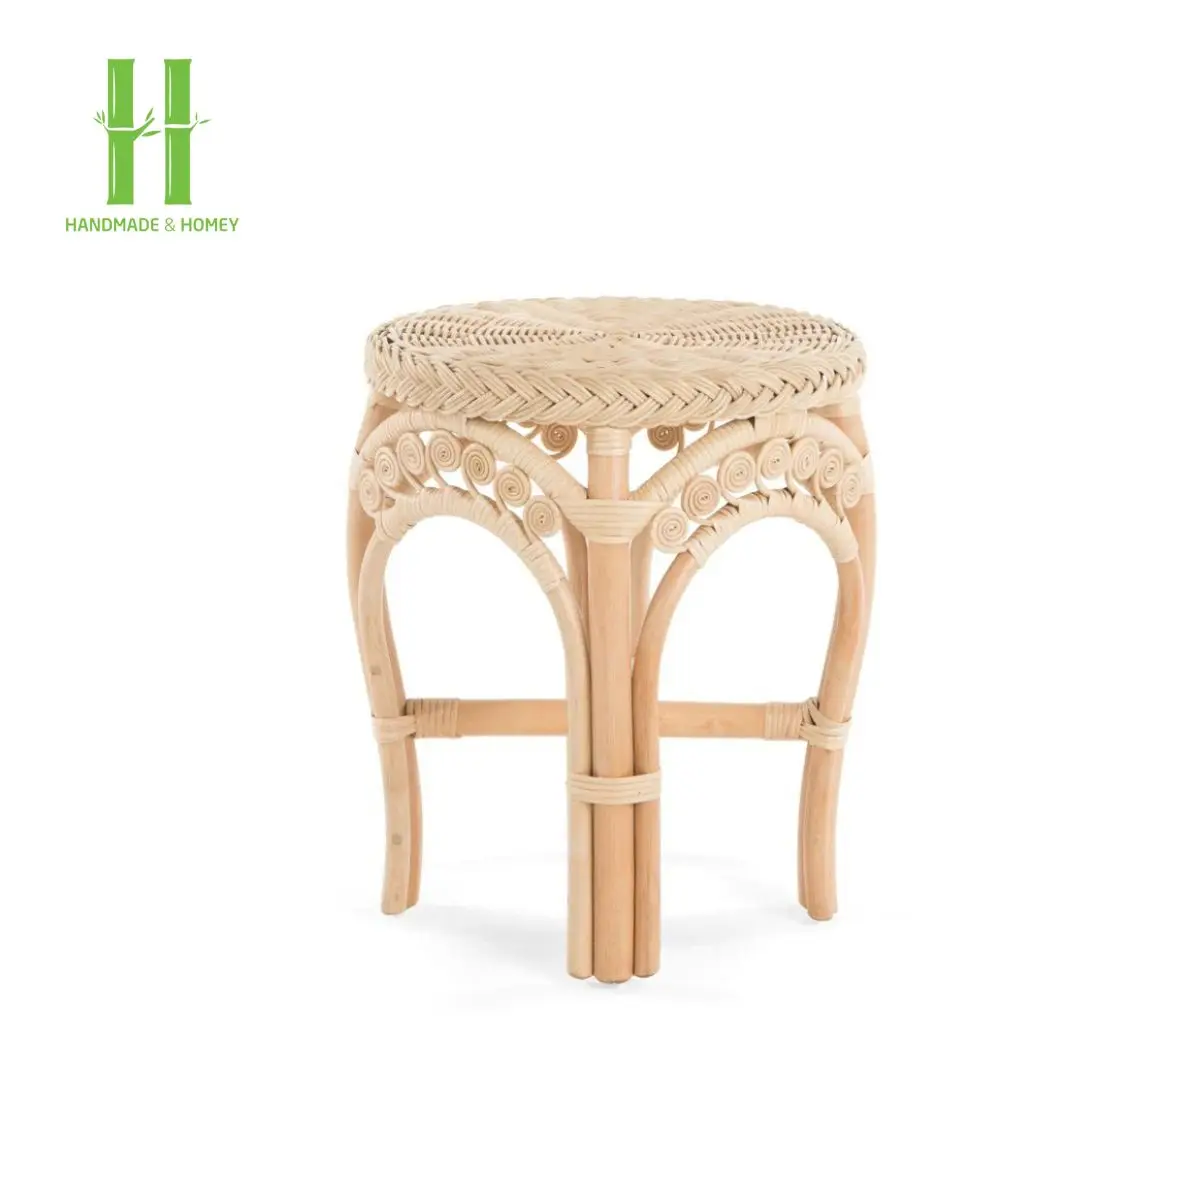 

Natural Rattan Stool Or Side Table OEM Design Customize Handmade Decor Home Furniture From Vietnam Factory Directly